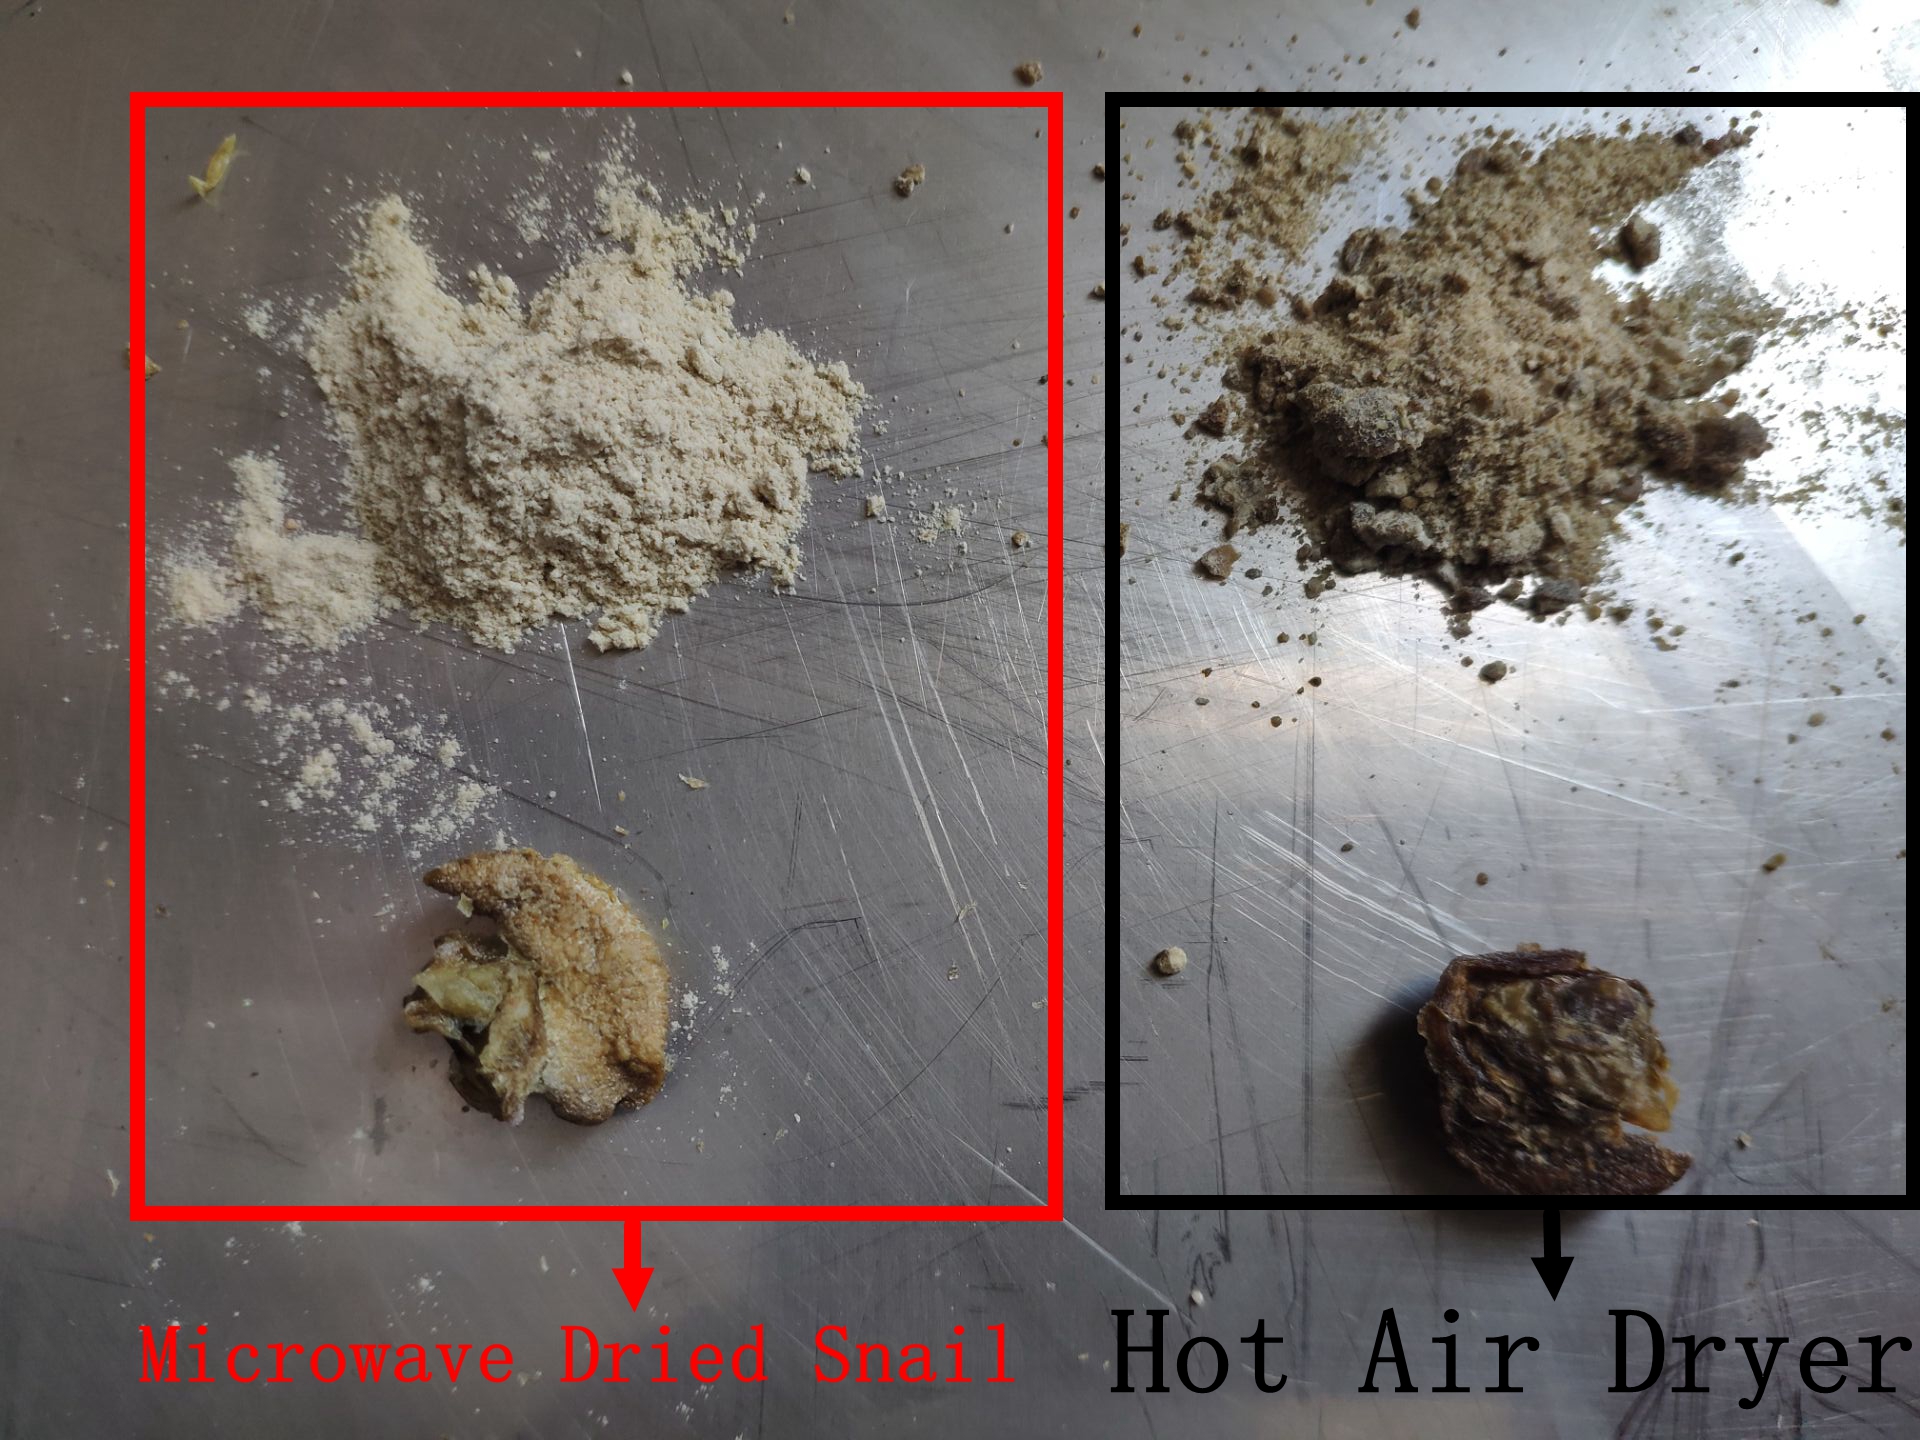 Microwave Dry Snail VS Hot Air Oven Dry Snail